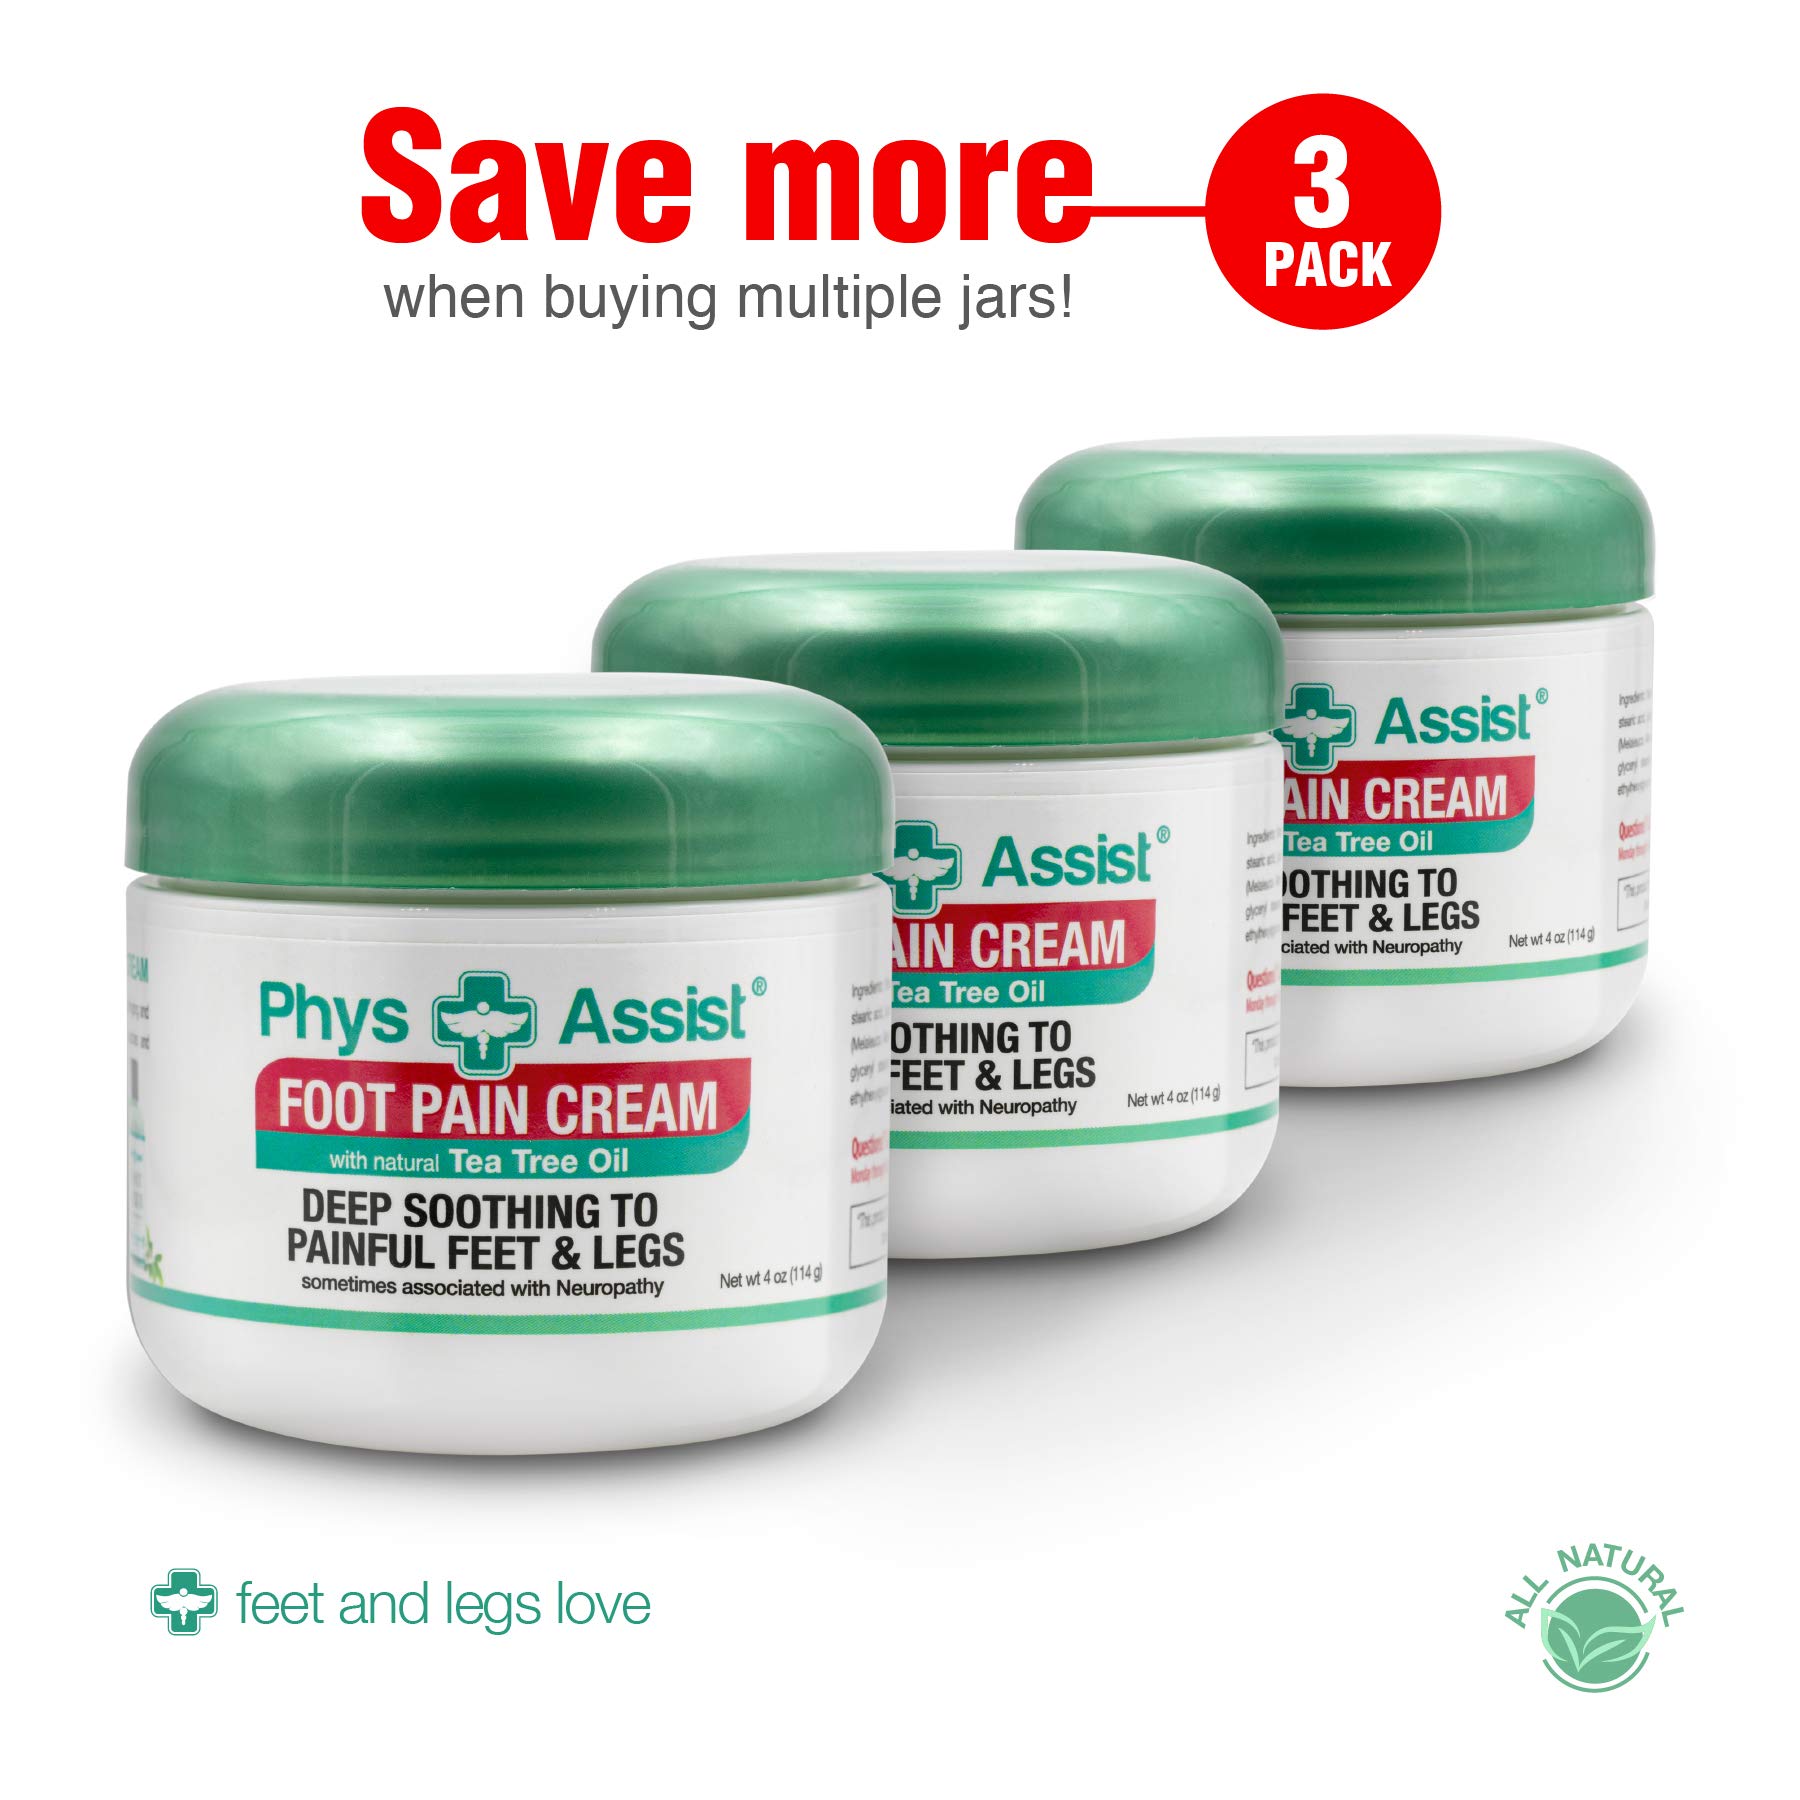 PhysAssist Foot Pain Cream (Three - 4 oz jars) Soothing to feet and Legs.